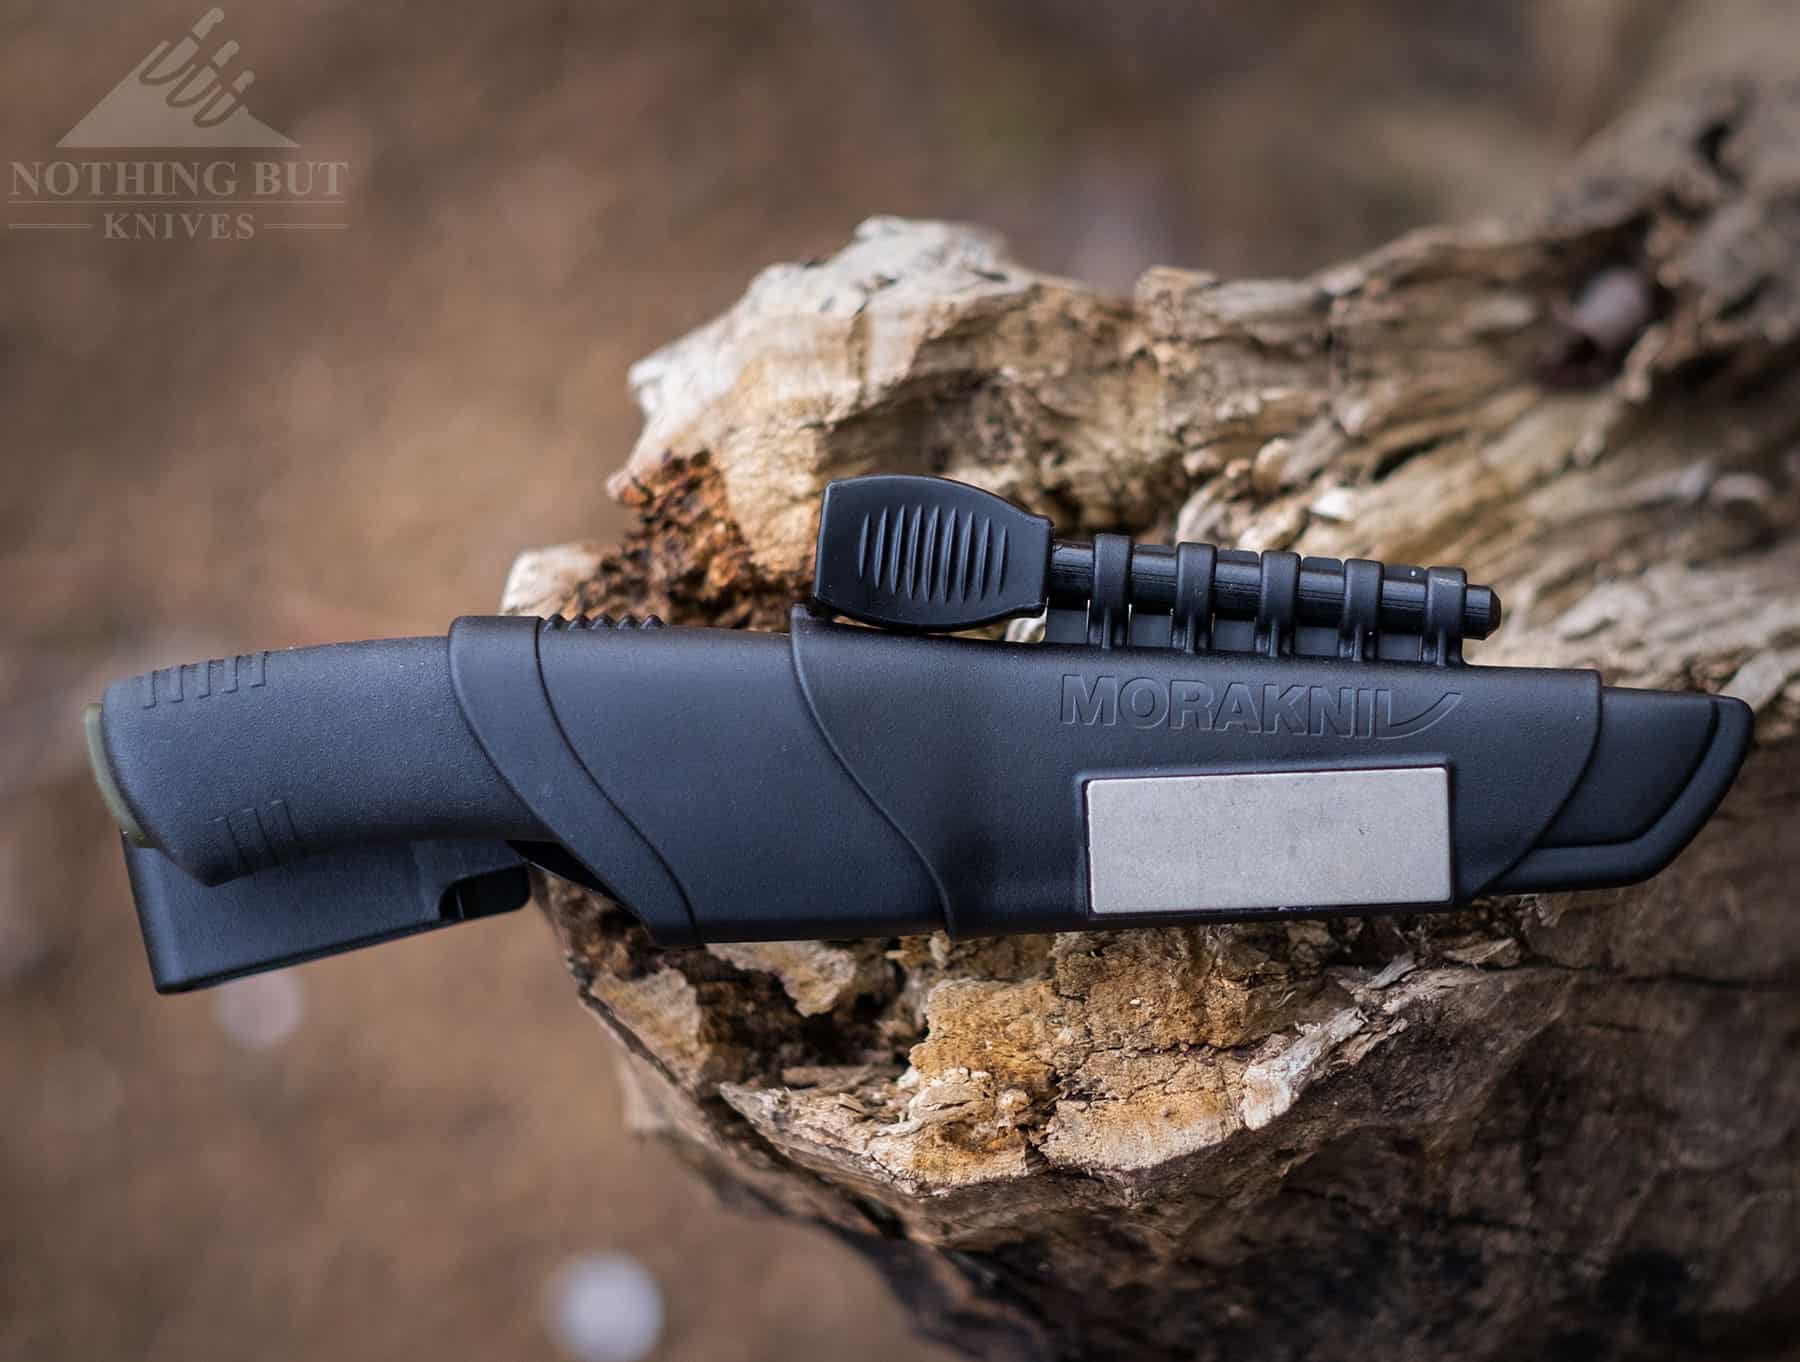 The Morakniv Bushcraft Black ships with a versatile sheath capable of multiple carry options. 